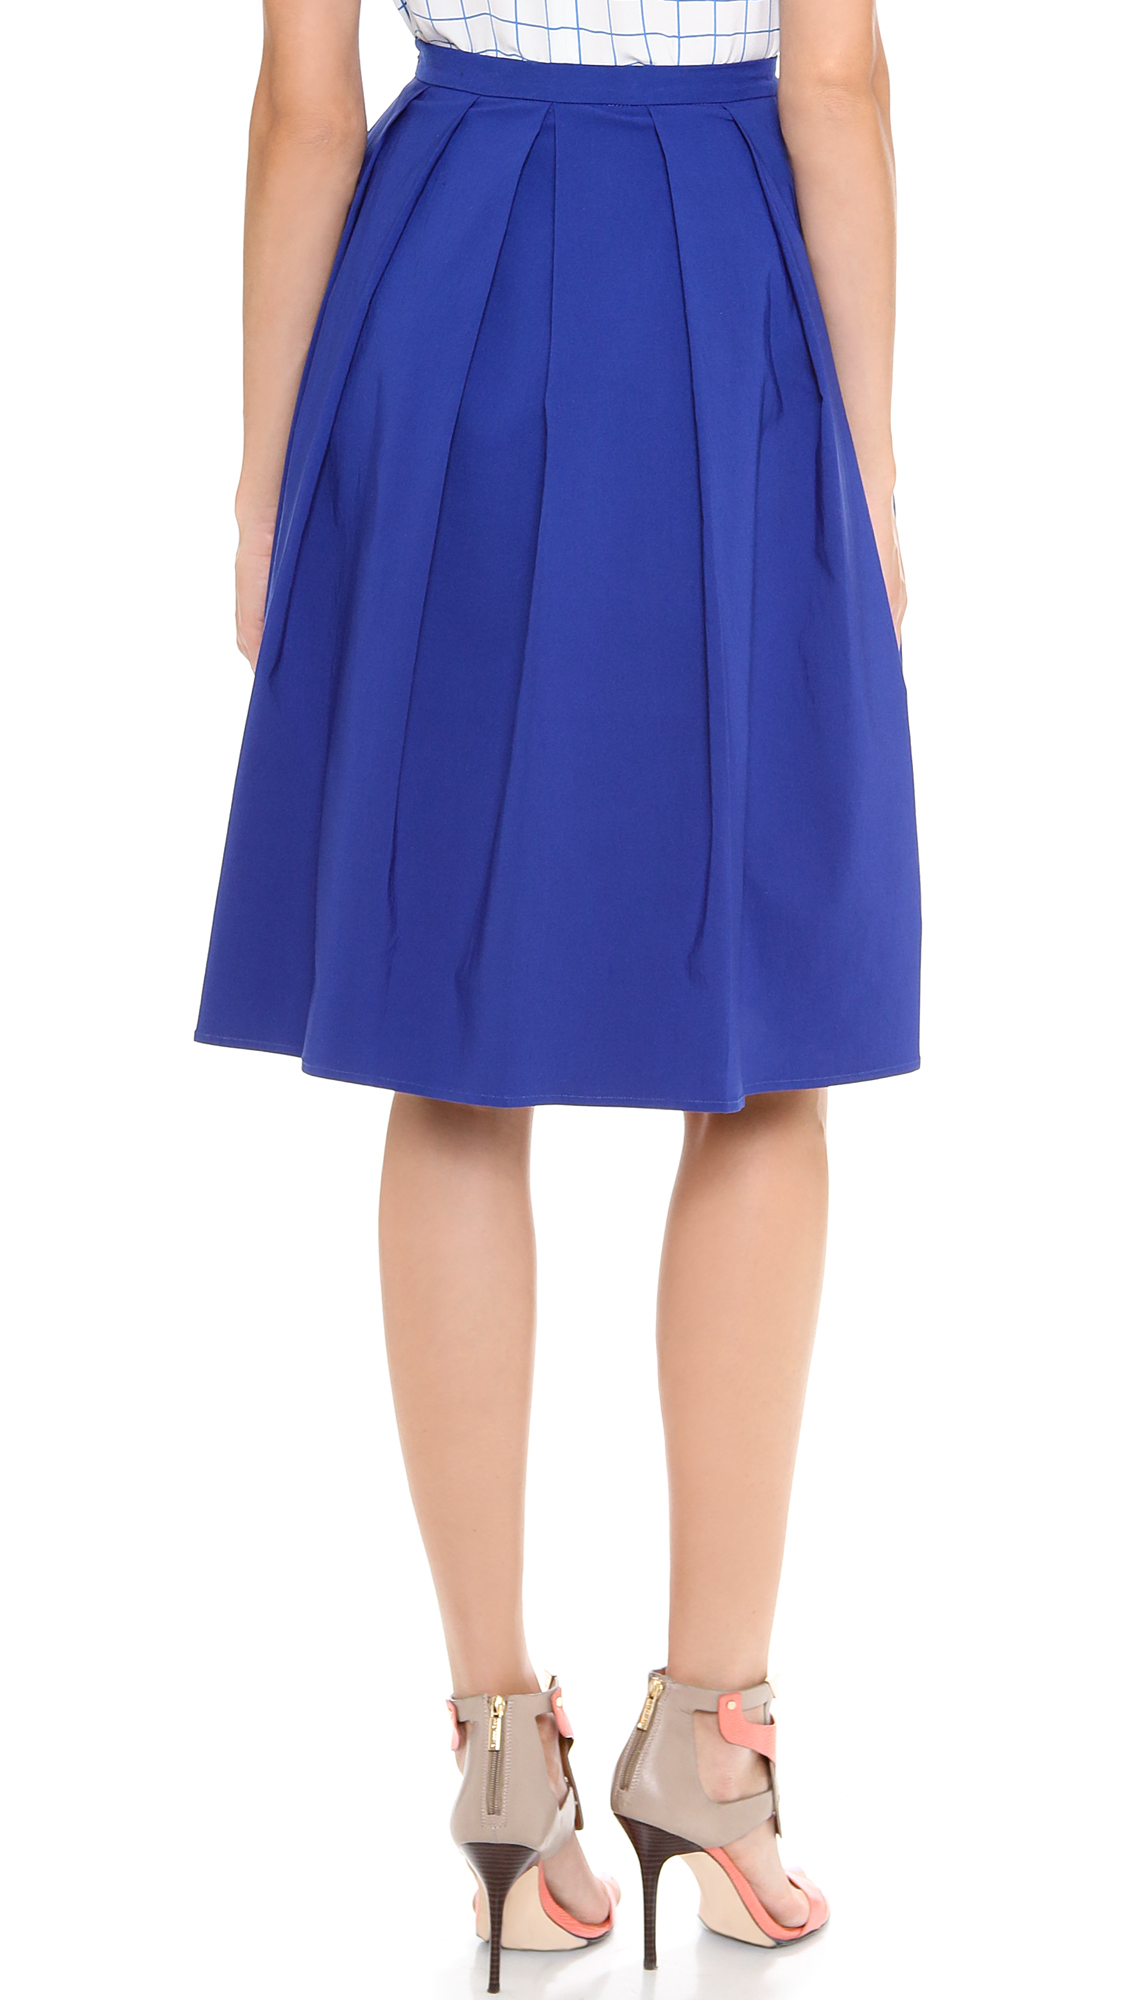 Lyst - Blaque Label Pleated Skirt - Black in Blue